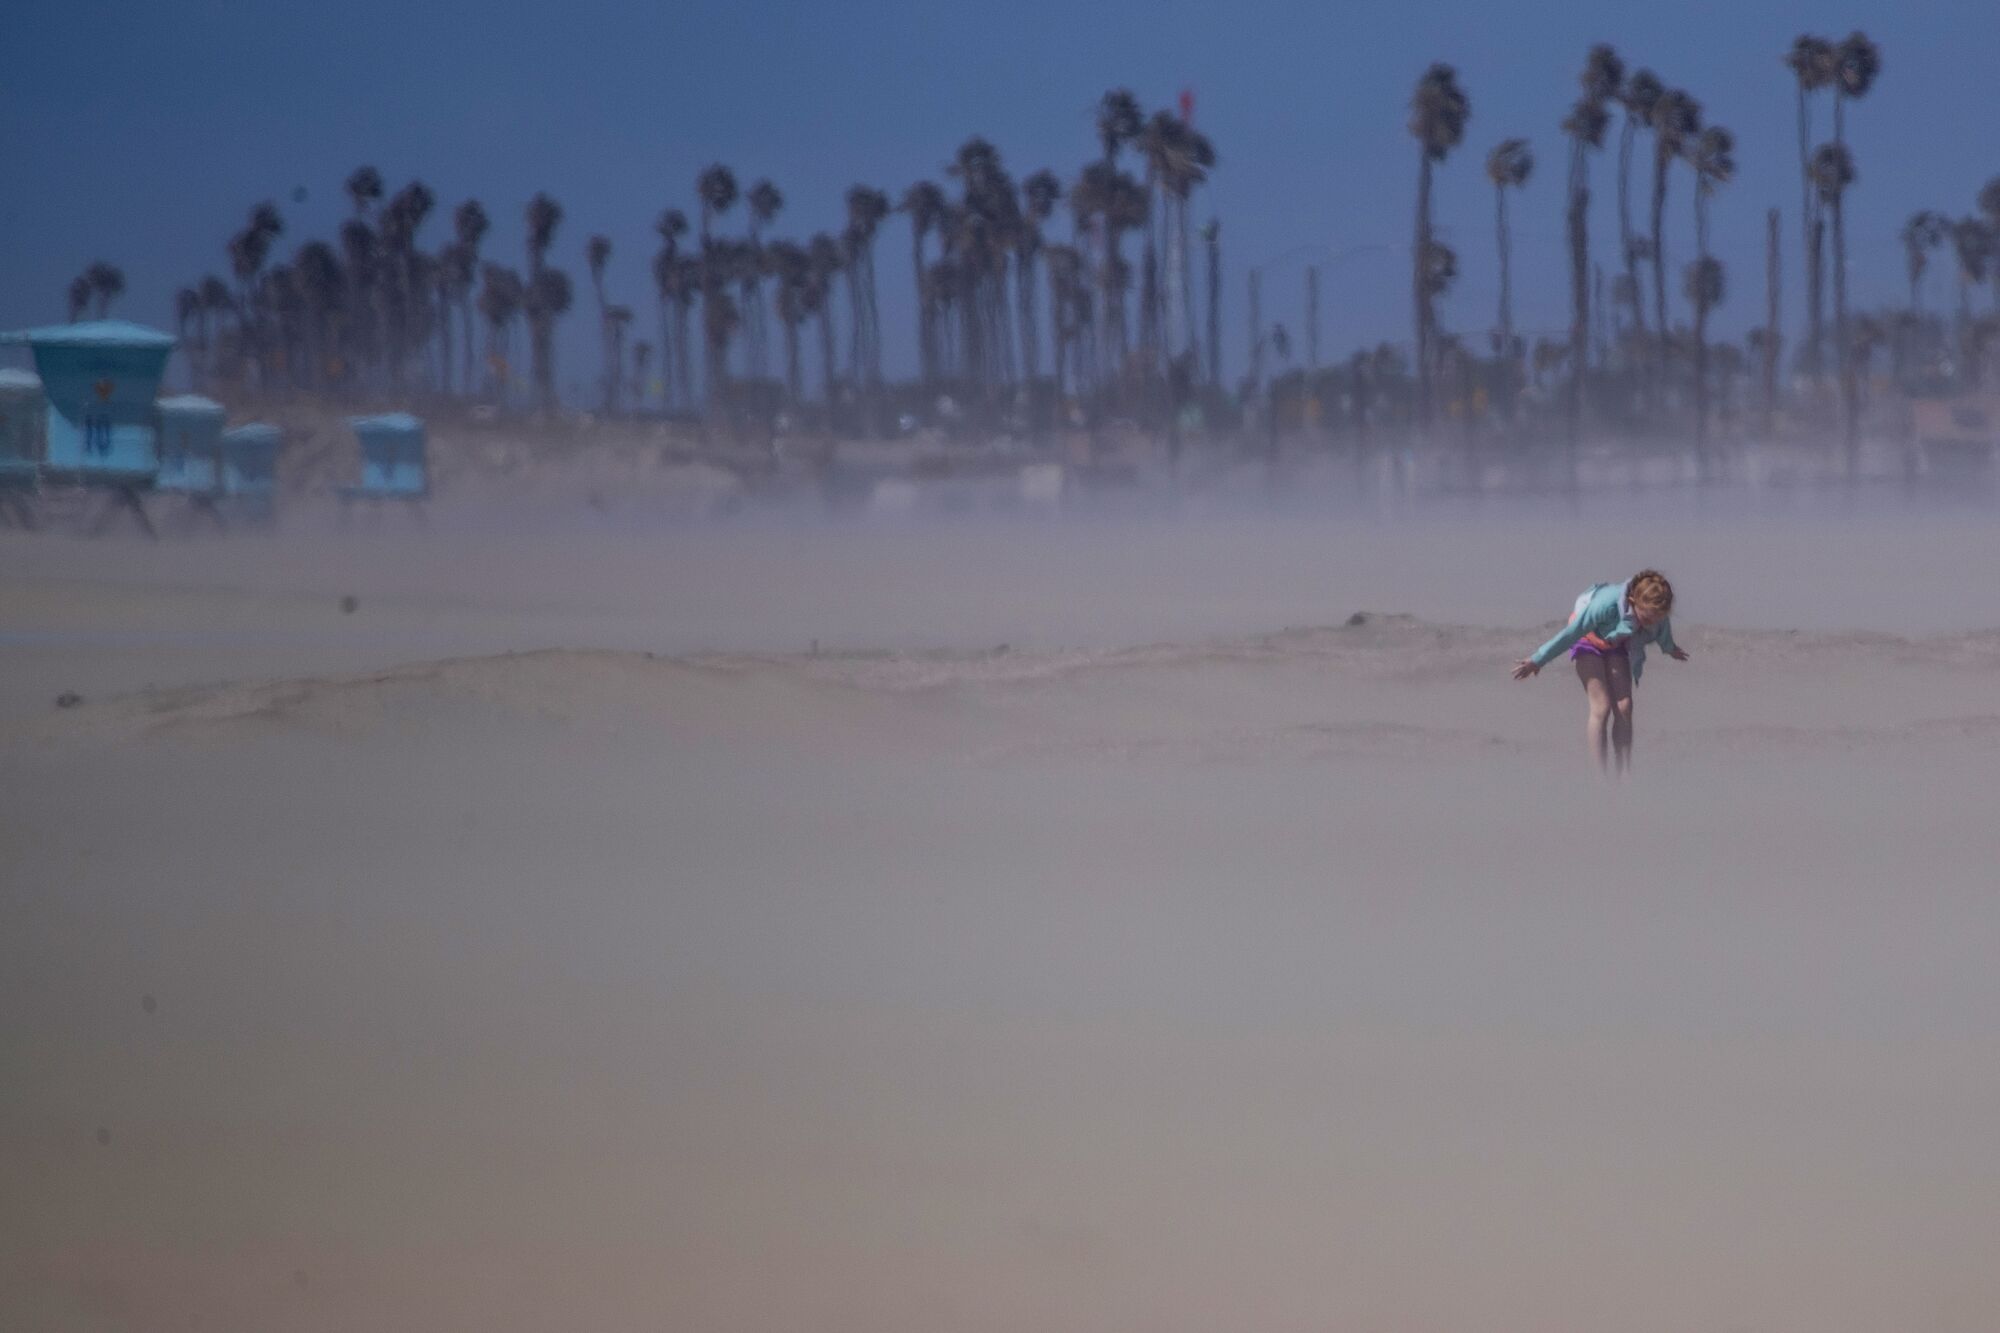 A child plays in the blowing sand and cold wind in Huntington Beach Wednesday.